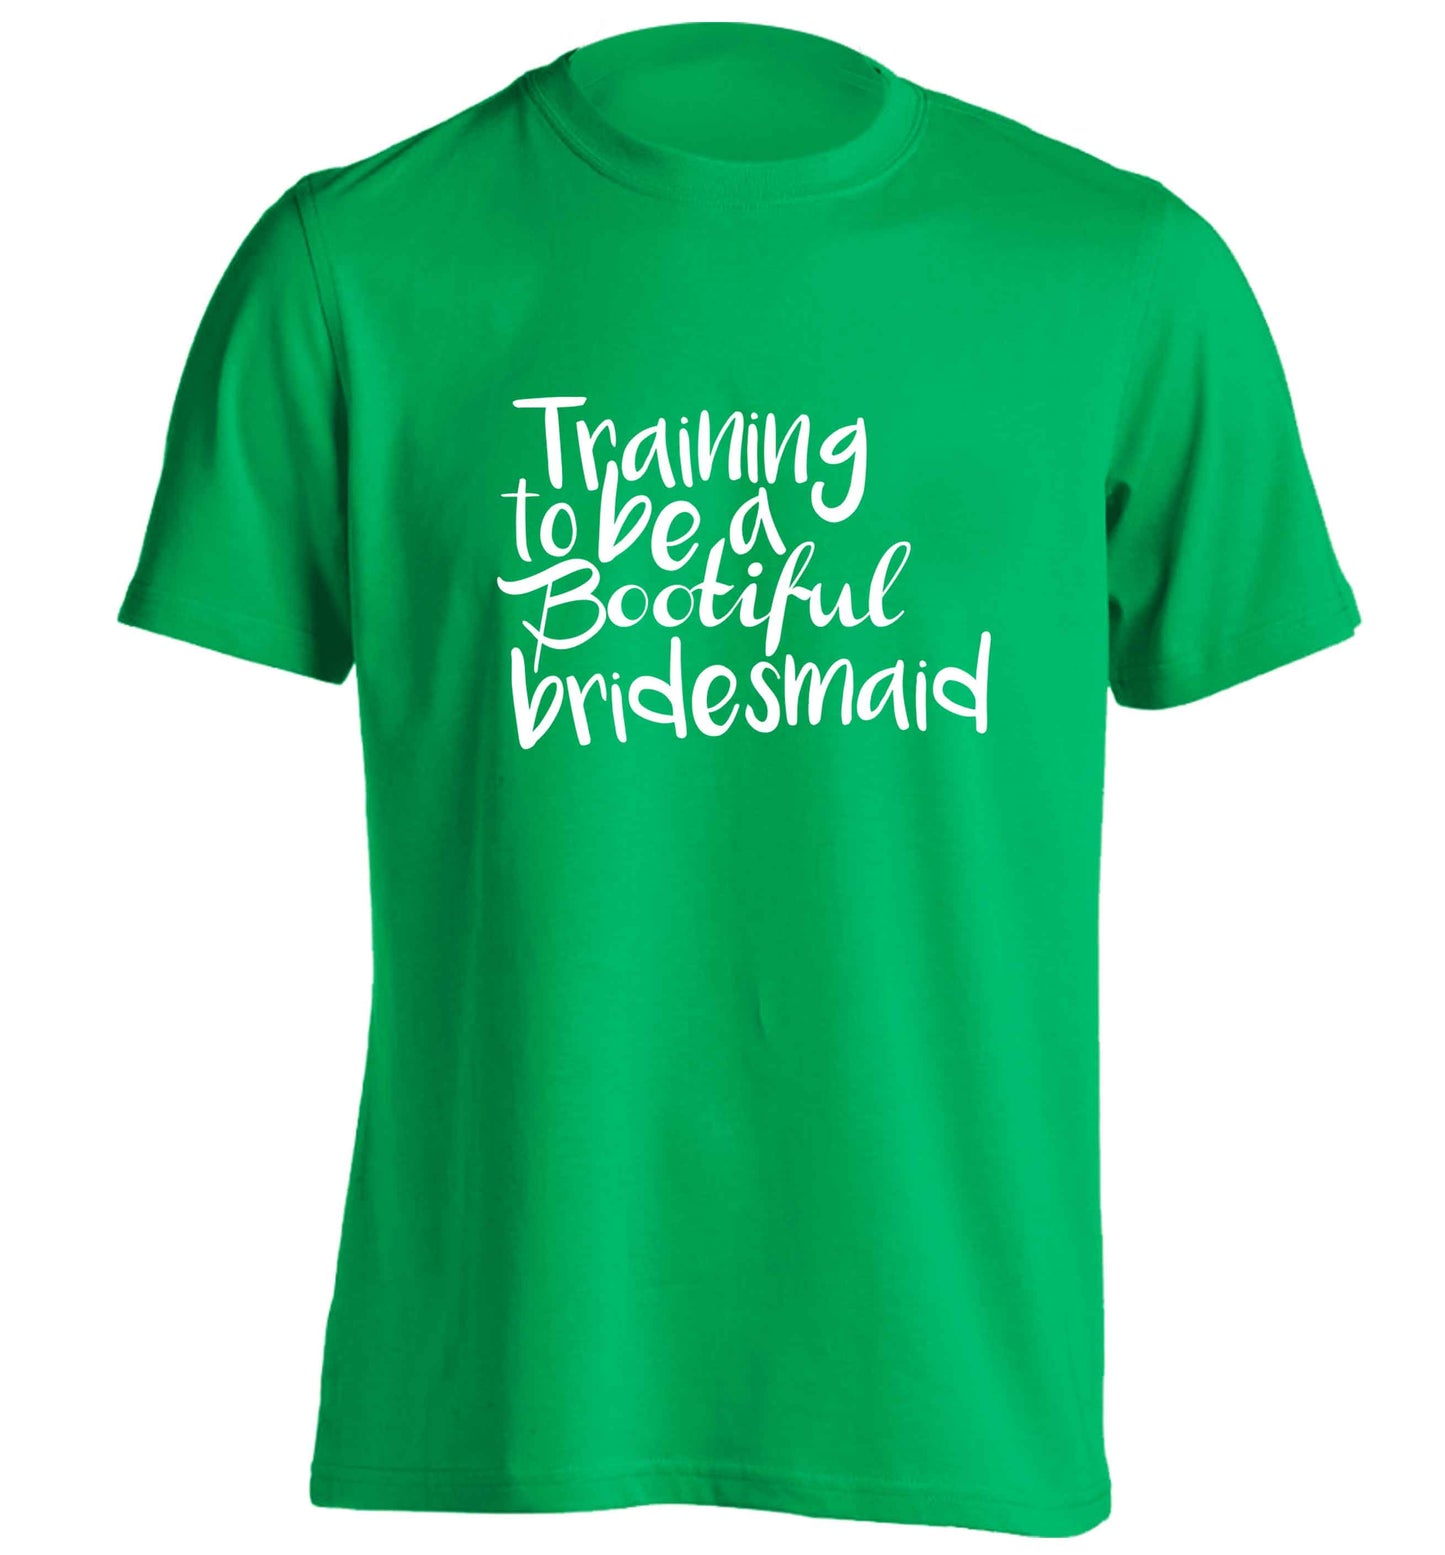 Get motivated and get fit for your big day! Our workout quotes and designs will get you ready to sweat! Perfect for any bride, groom or bridesmaid to be!  adults unisex green Tshirt 2XL